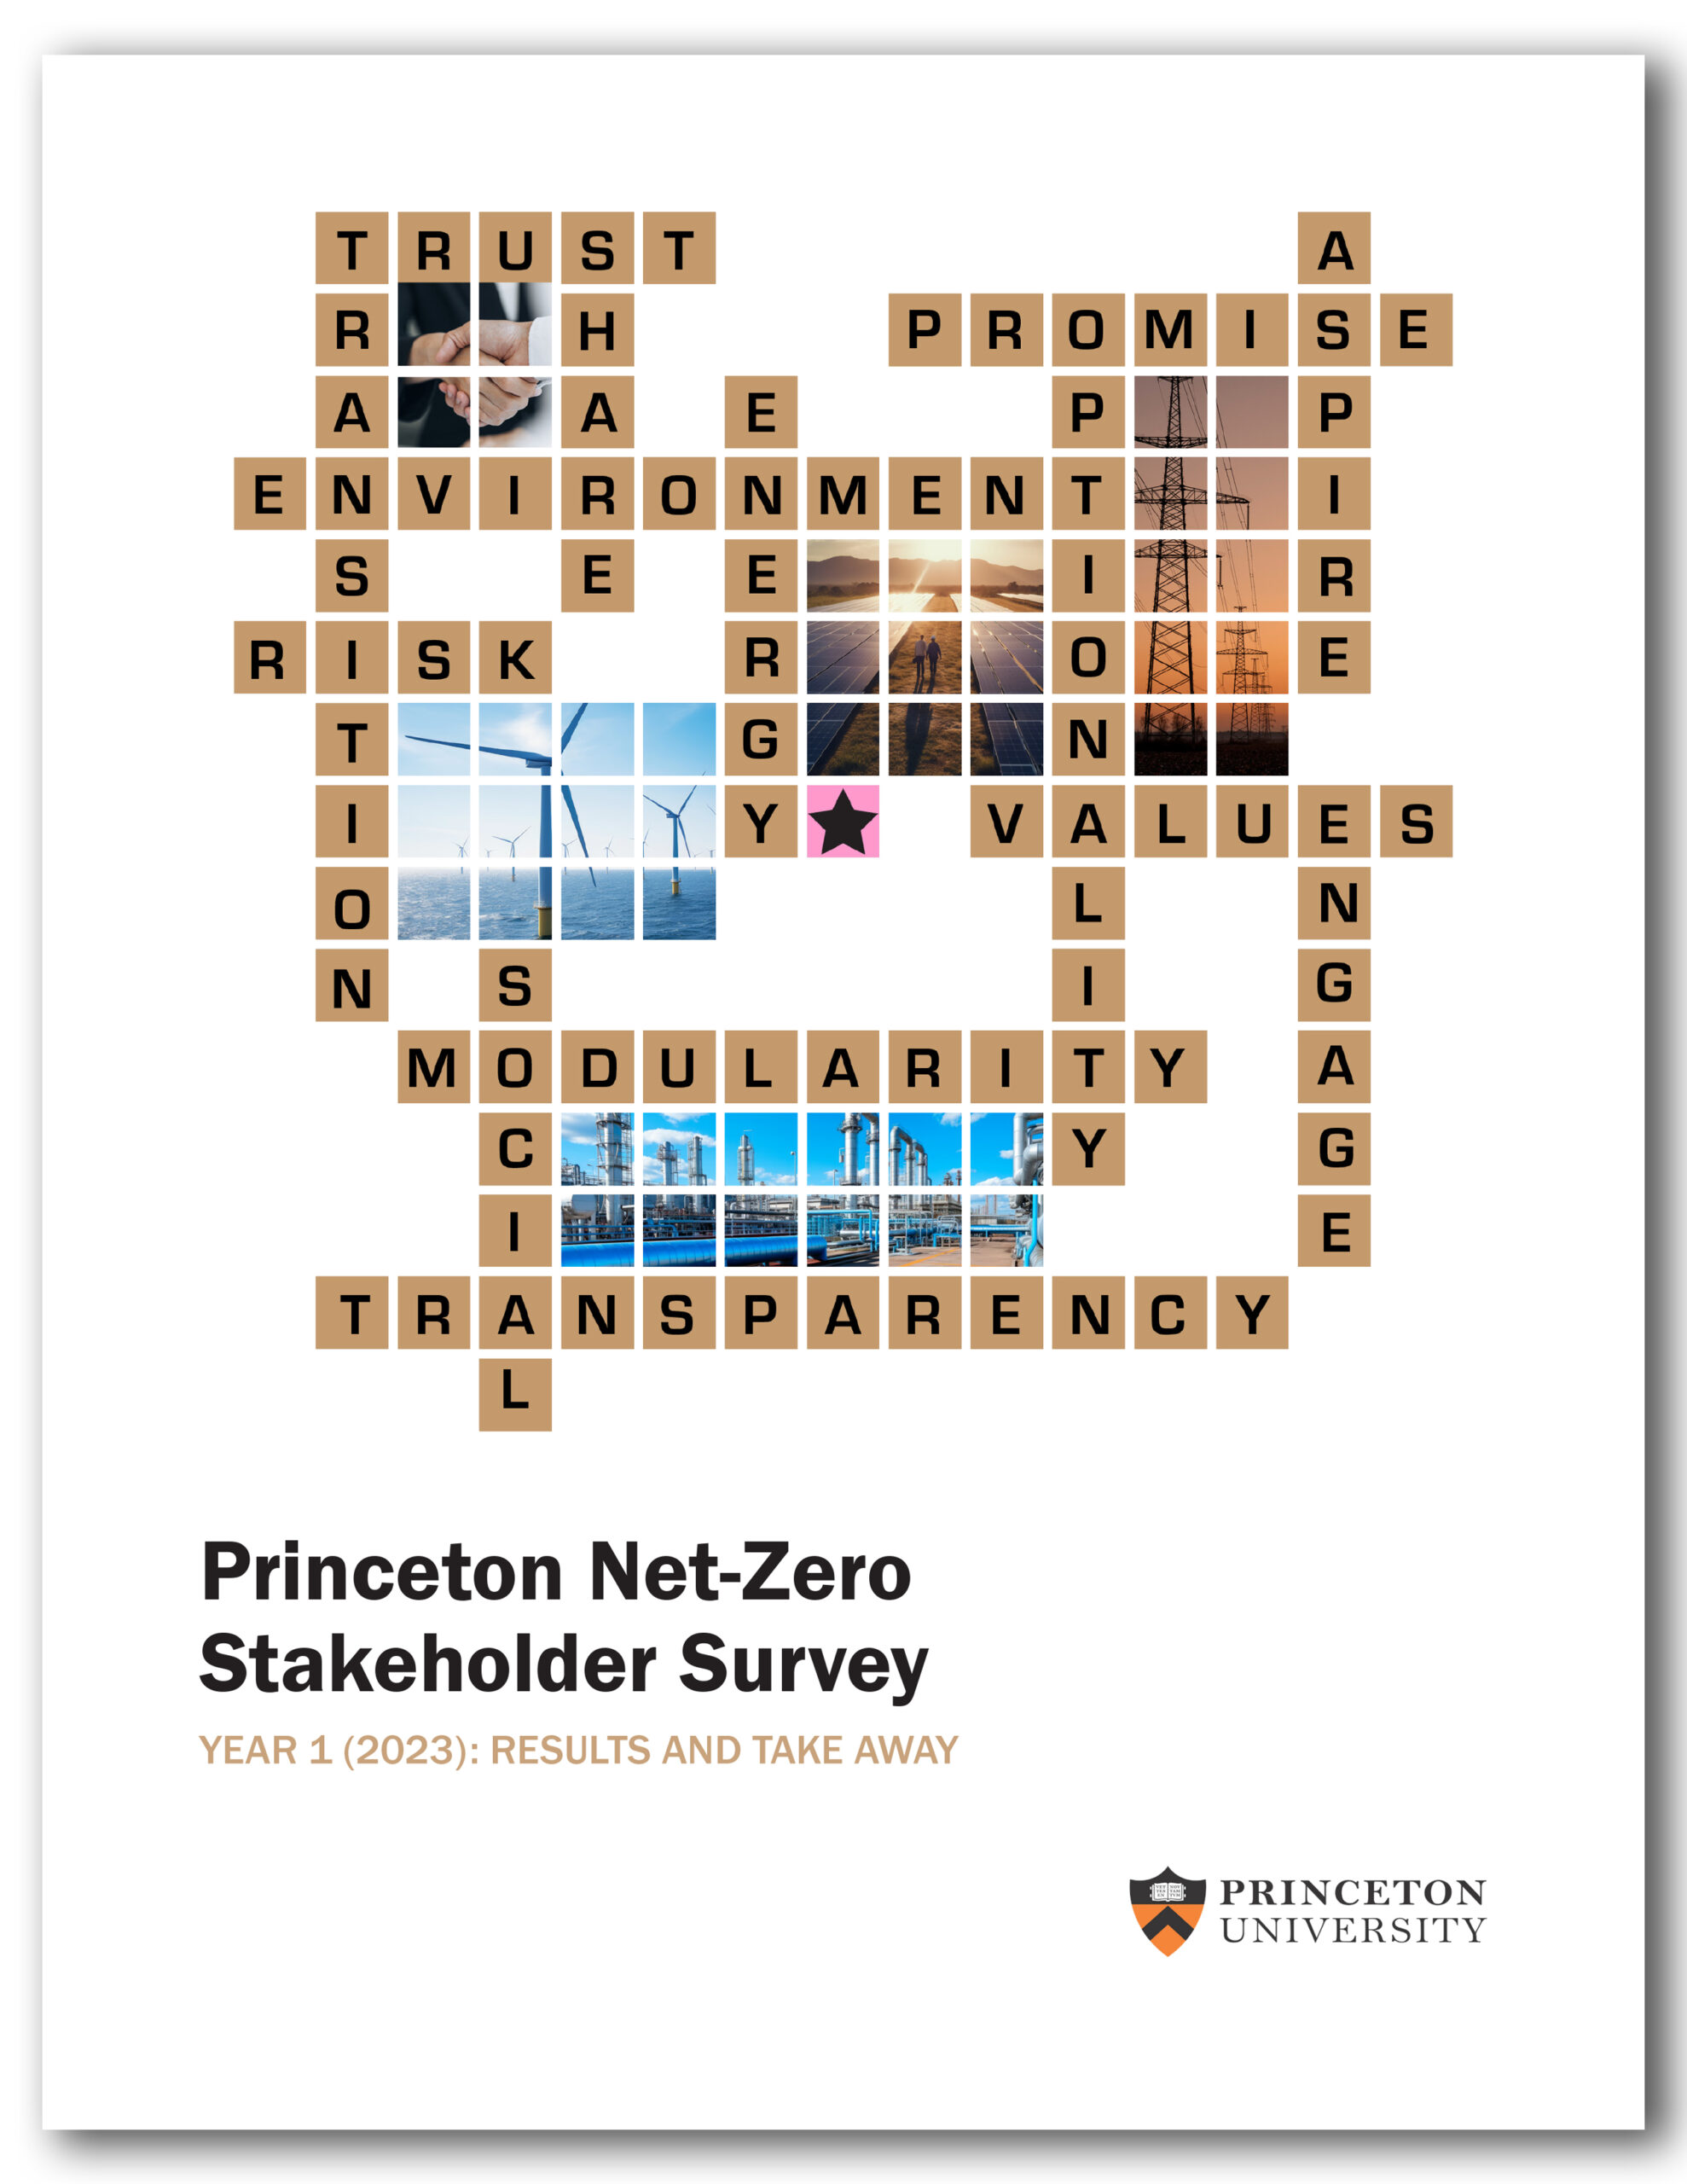 The cover page of the Princeton Net-Zero Stakeholder Survey report (cover design by Bumper DeJesus).